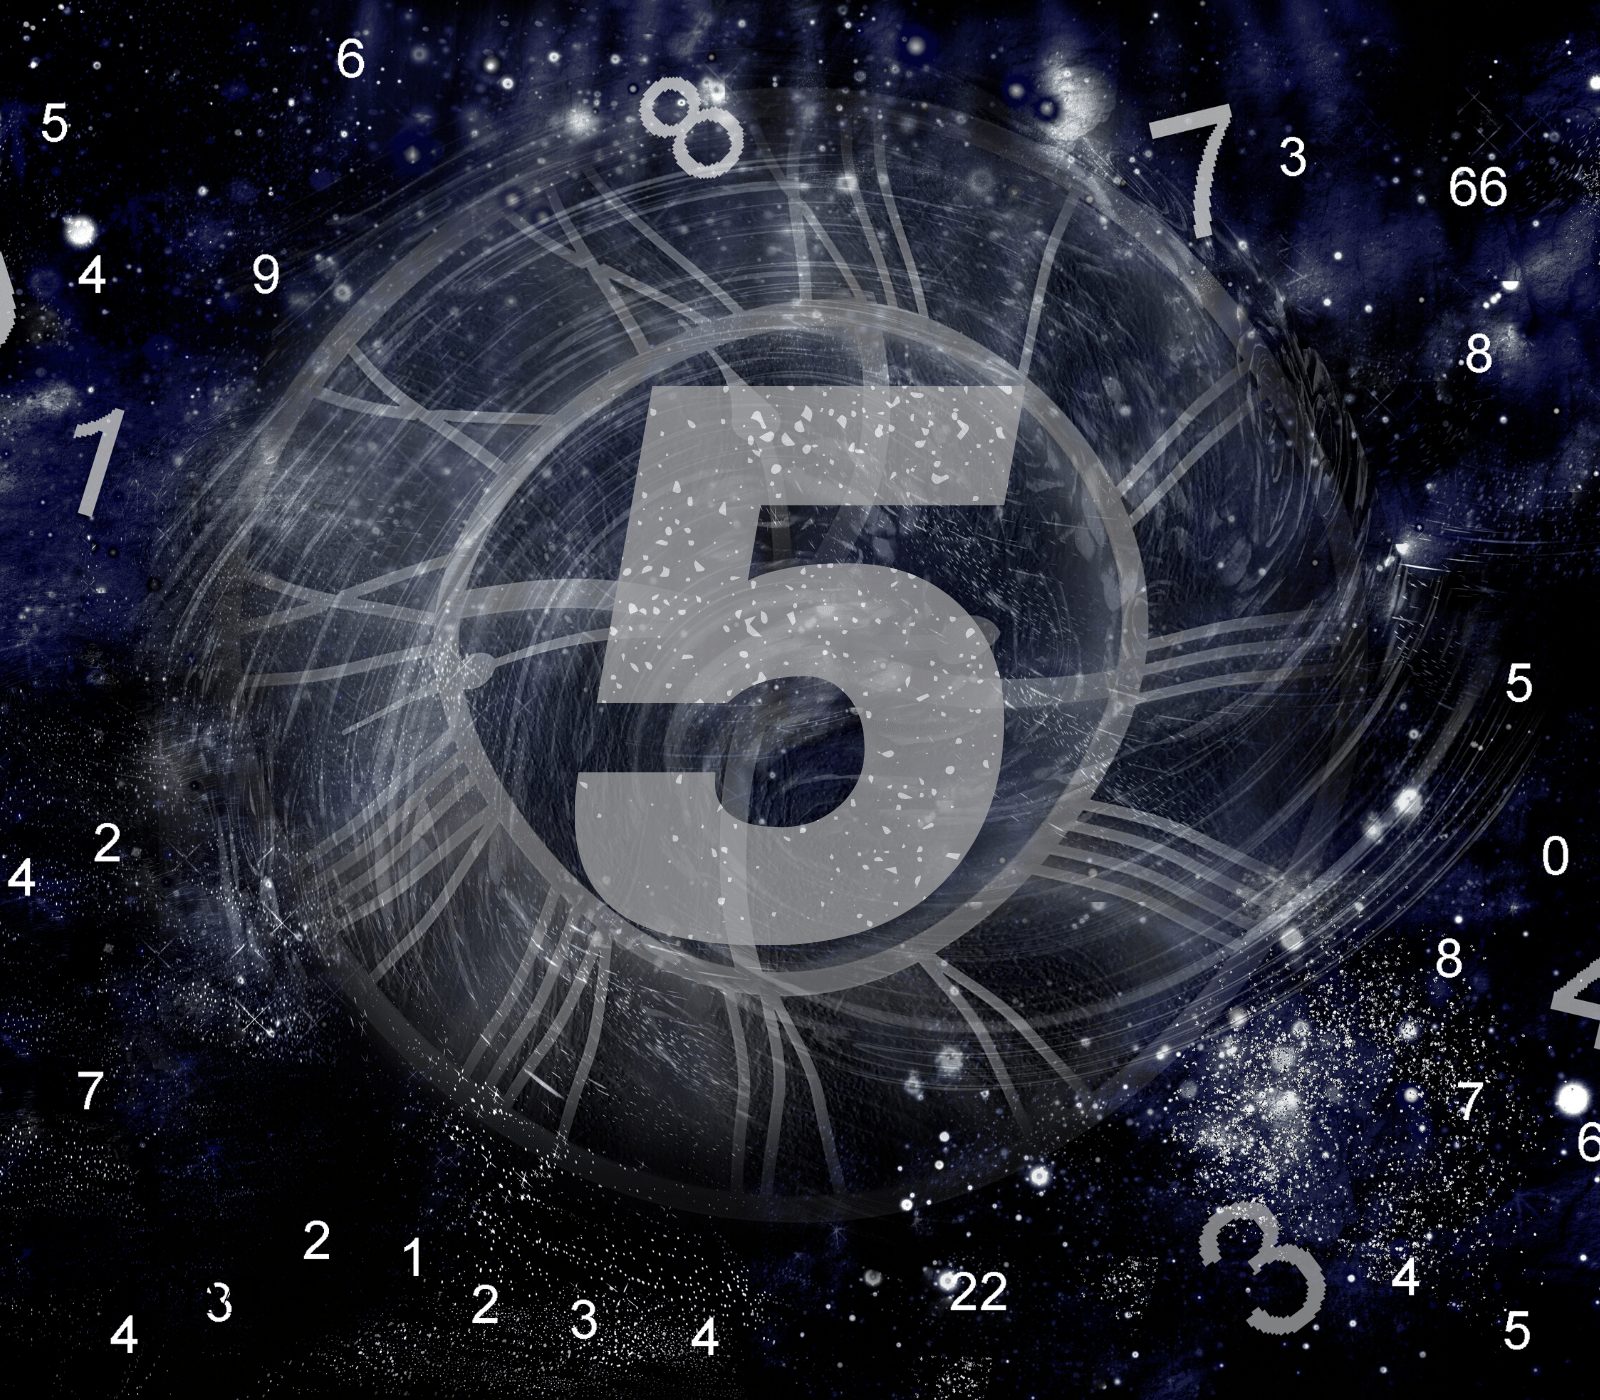 5 in numerology